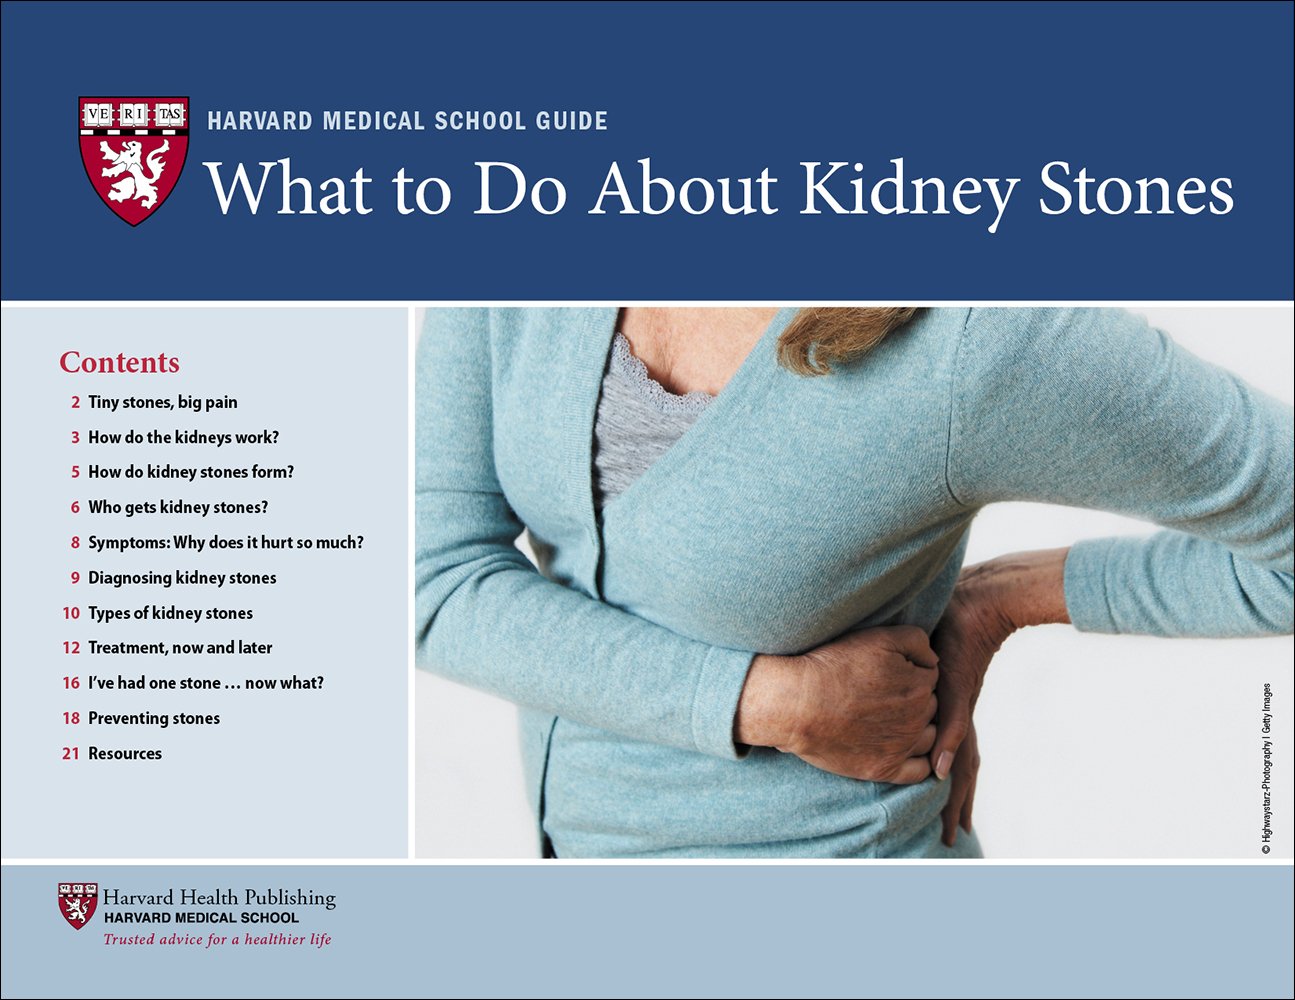 Where Does It Hurt With Kidney Stones